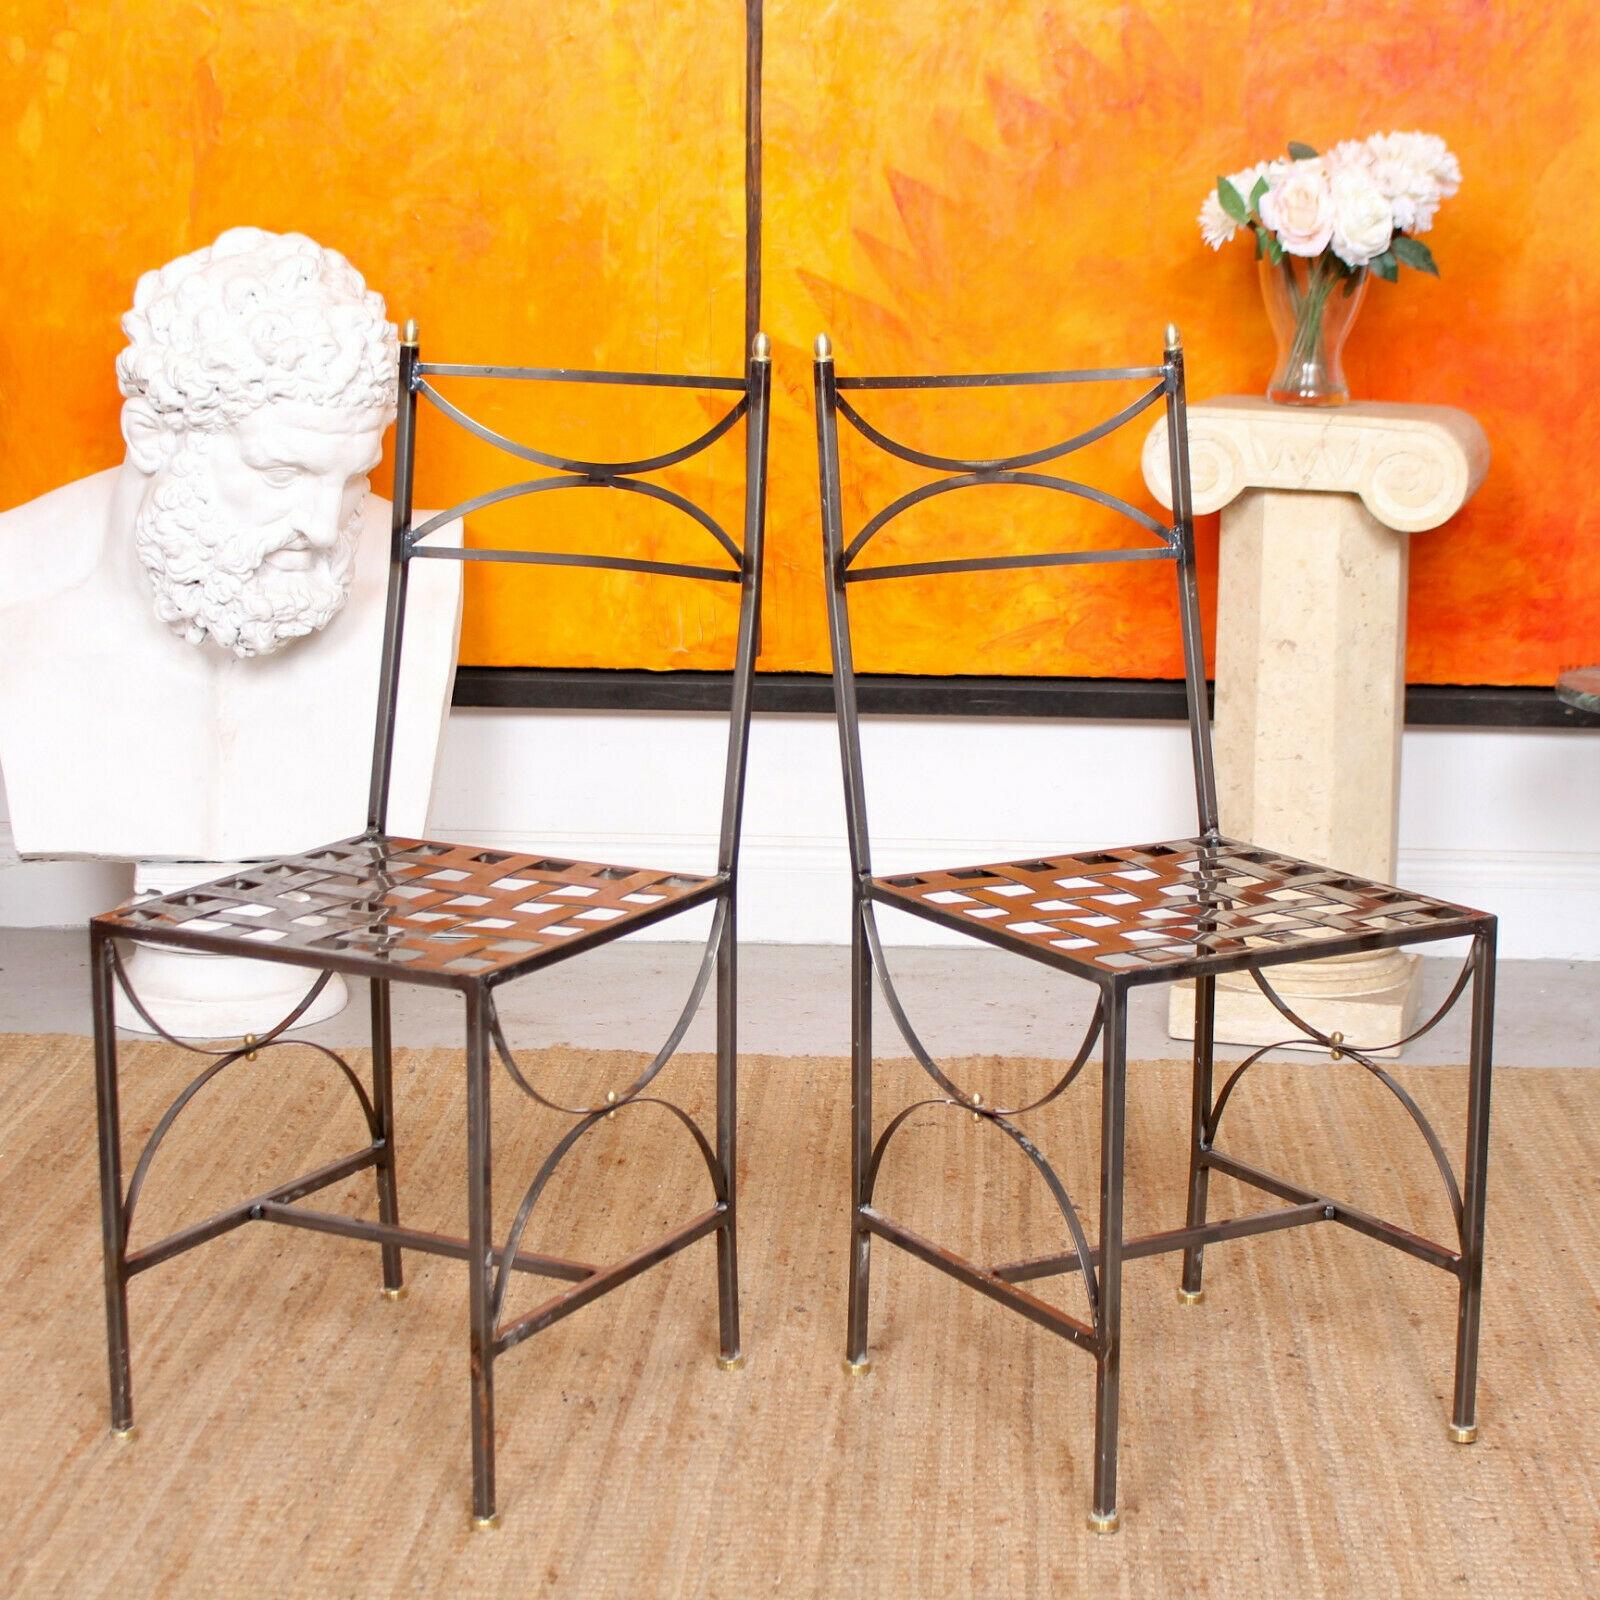 An attractive set of industrial design anodized steel handwrought orangery chairs.